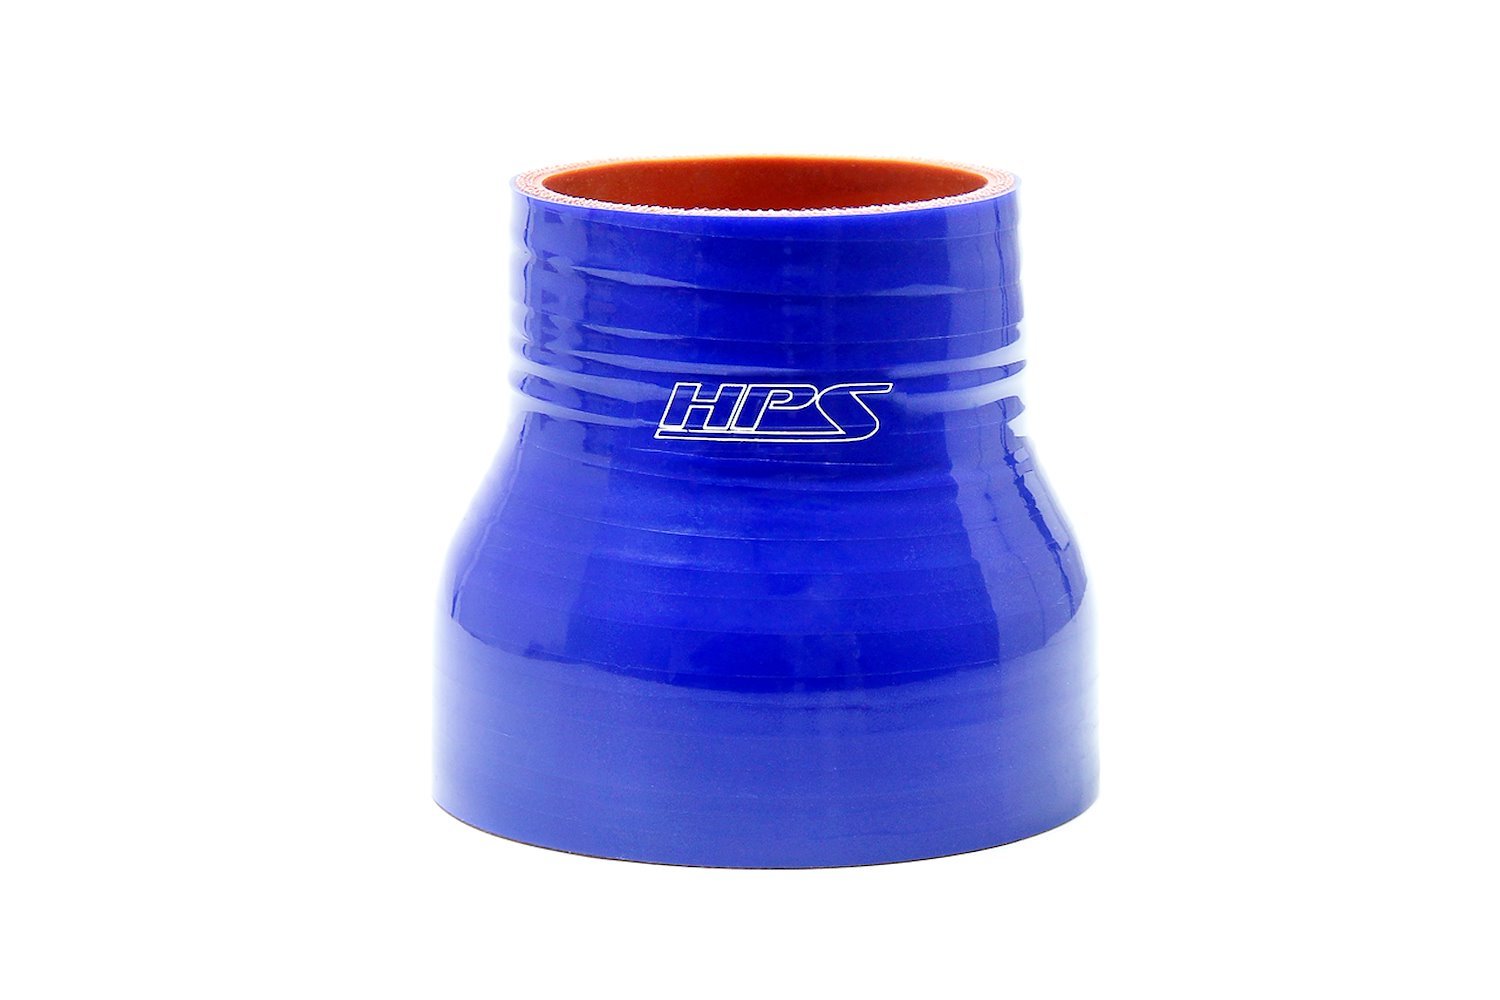 HTSR-300-325-L225-BLUE Silicone Reducer Hose, High-Temp 4-Ply Reinforced, 3 in. - 3-1/4 in. ID, 2-1/4 in. Long, Blue